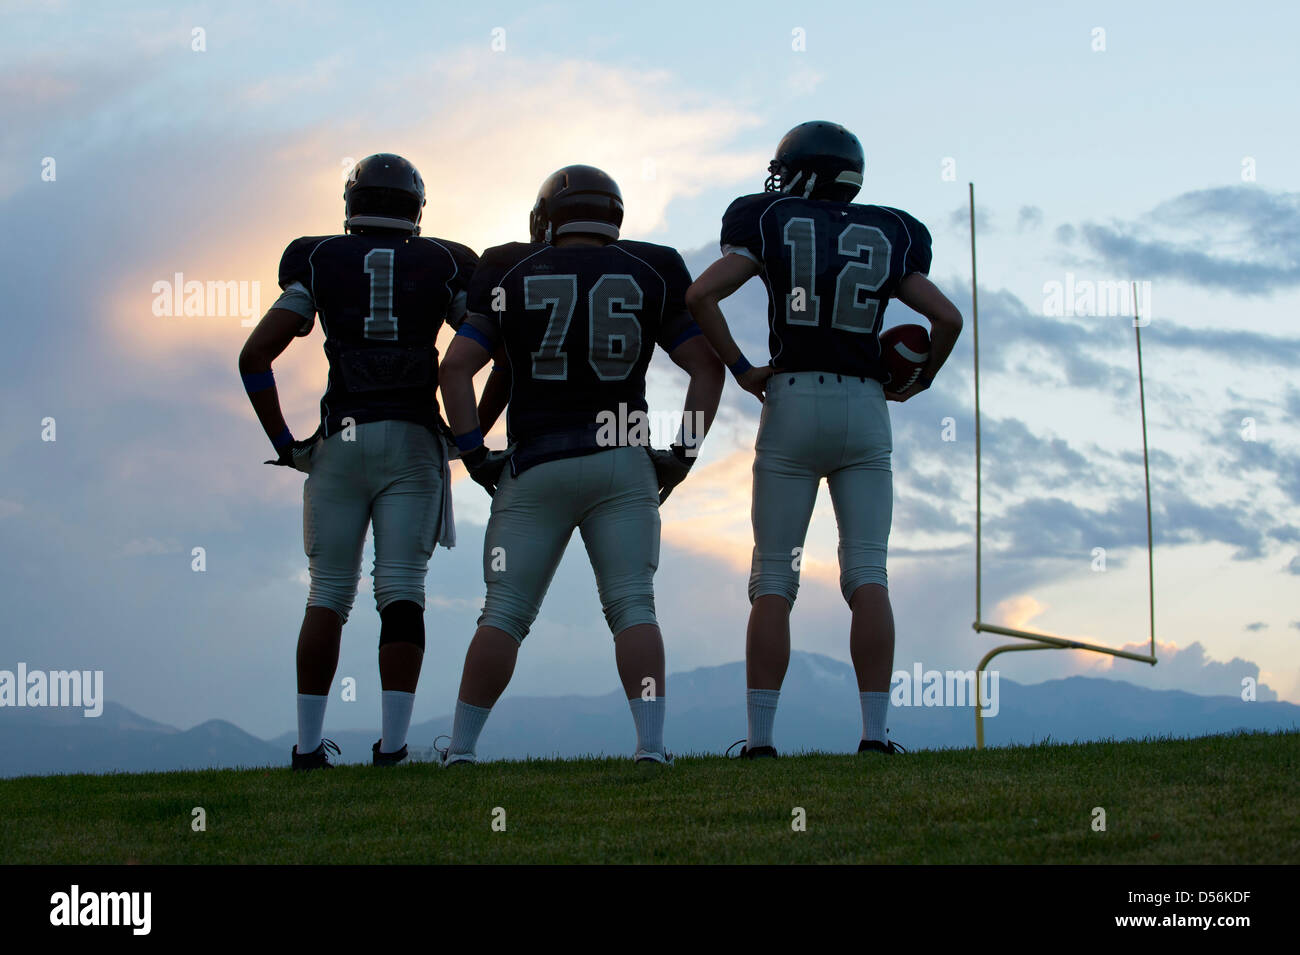 Football players standing on field Stock Photo